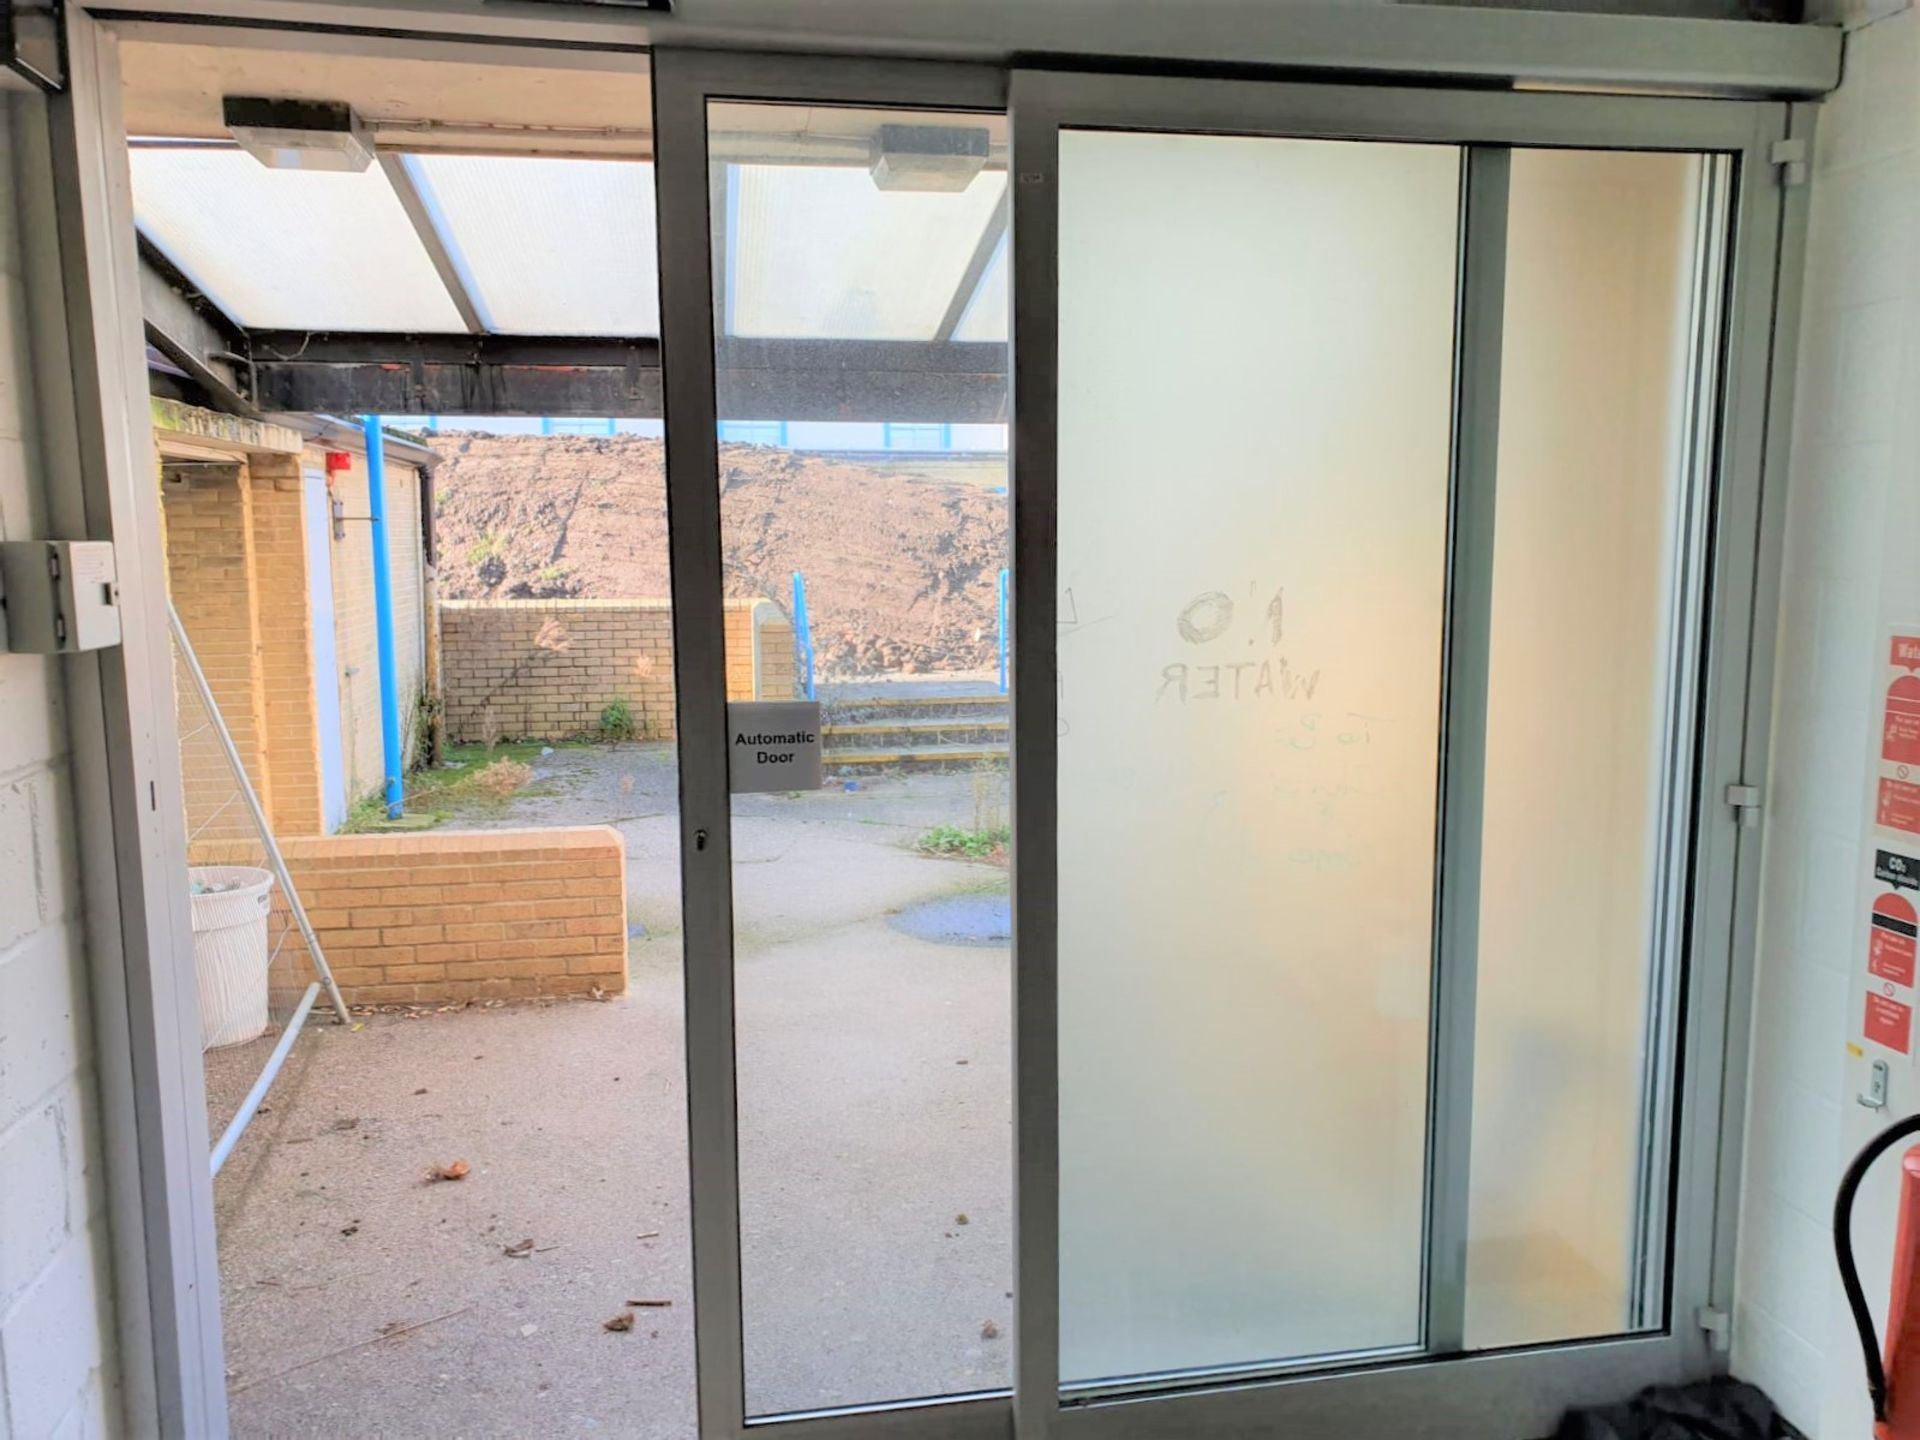 1 x Automatic Sliding Door With Metal Casing, Glazed Panels and Privacy Side Panels - H255 x W280